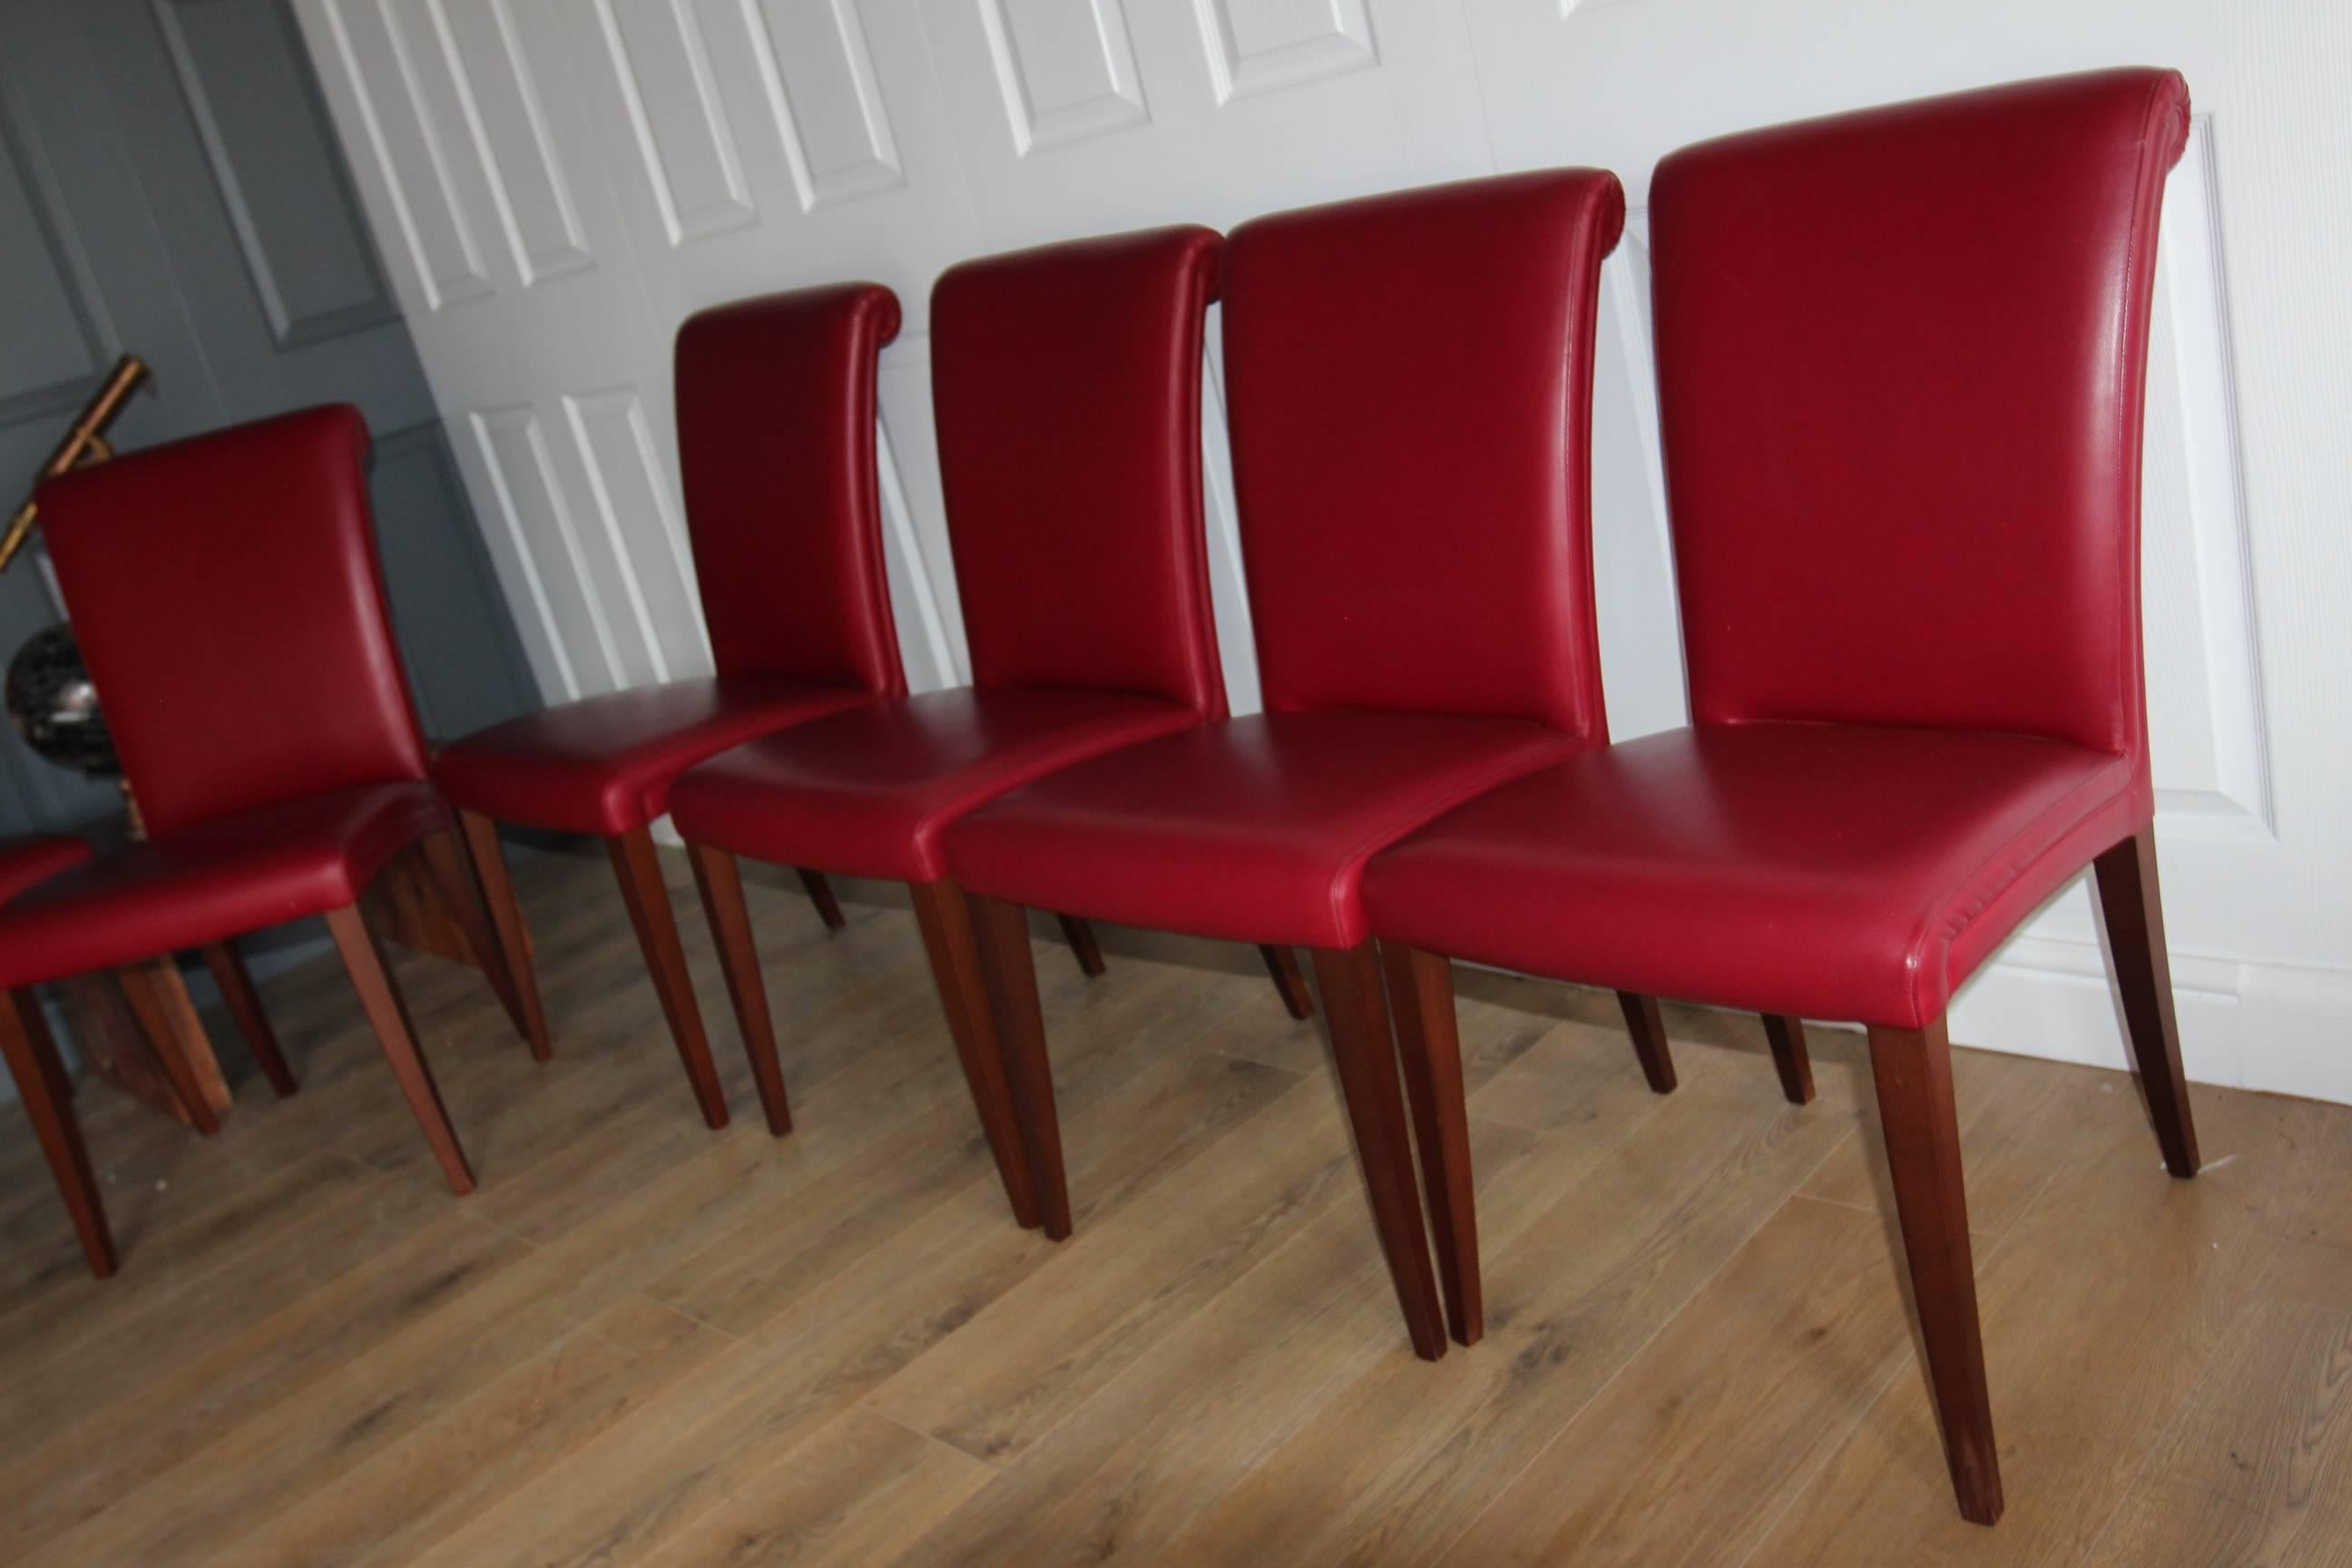 Poltrona Frau ‘Vittoria’ Set of Eight Dining Chairs in Claret Leather In Excellent Condition For Sale In London, GB